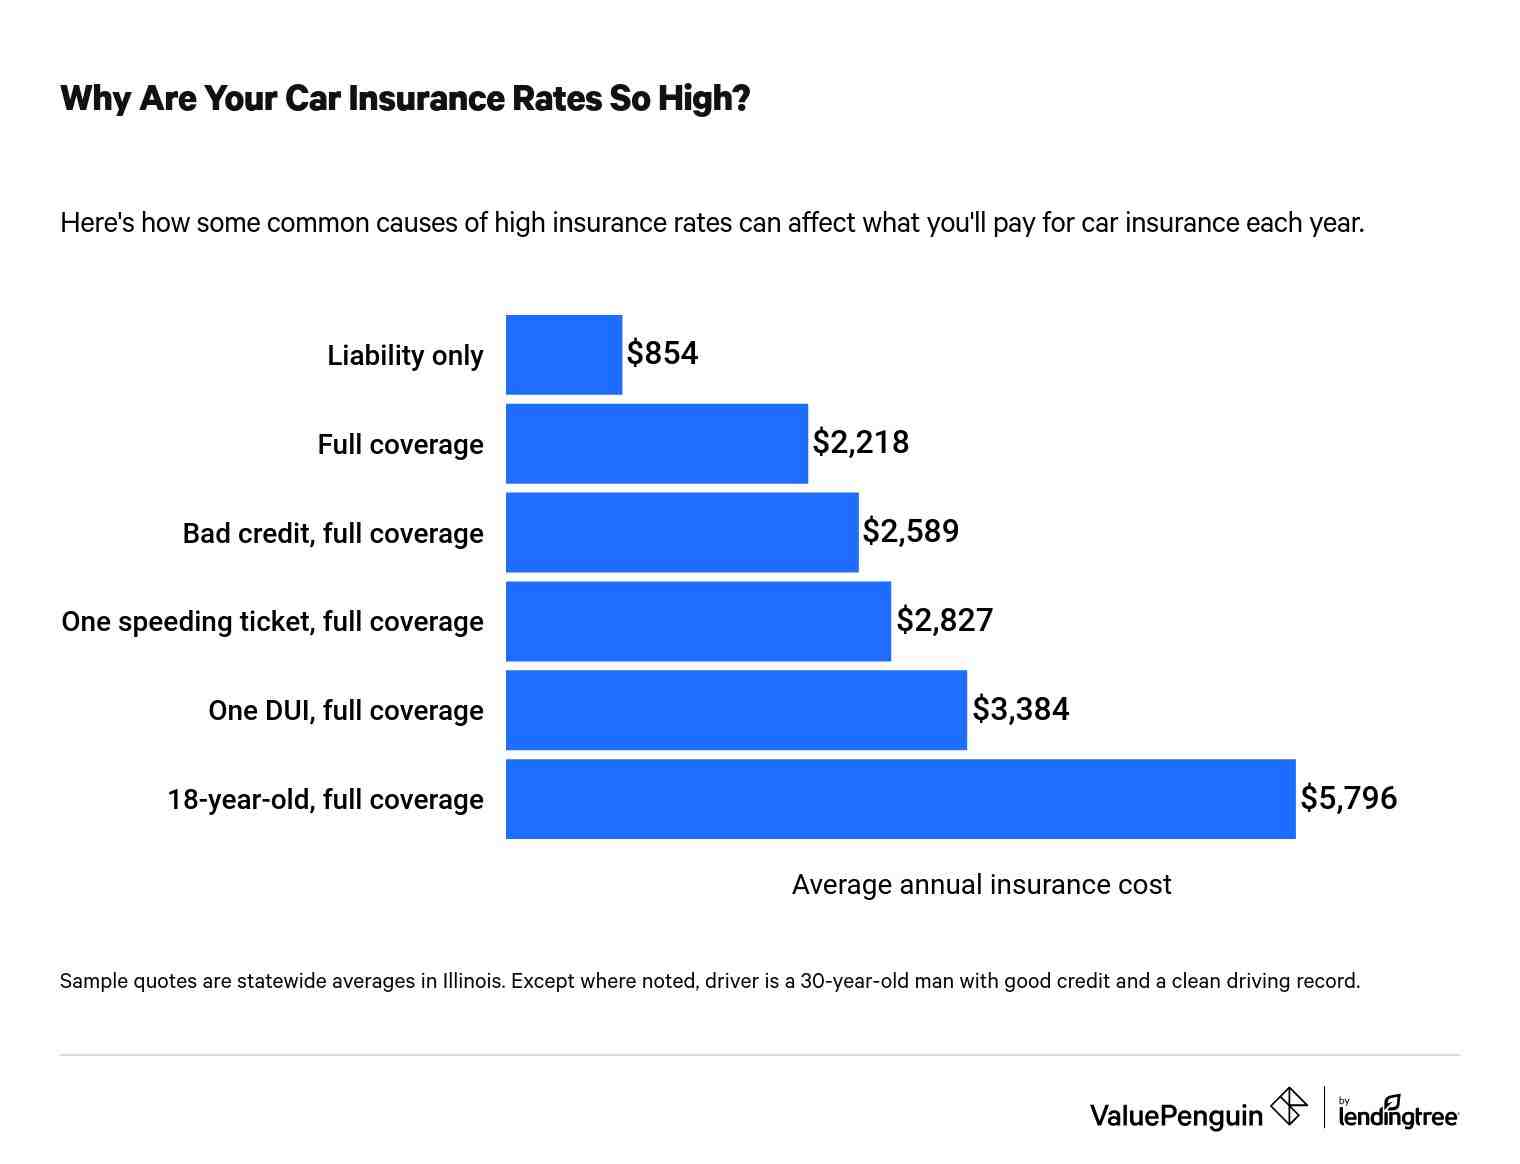 Which group pays more for car insurance single or married?